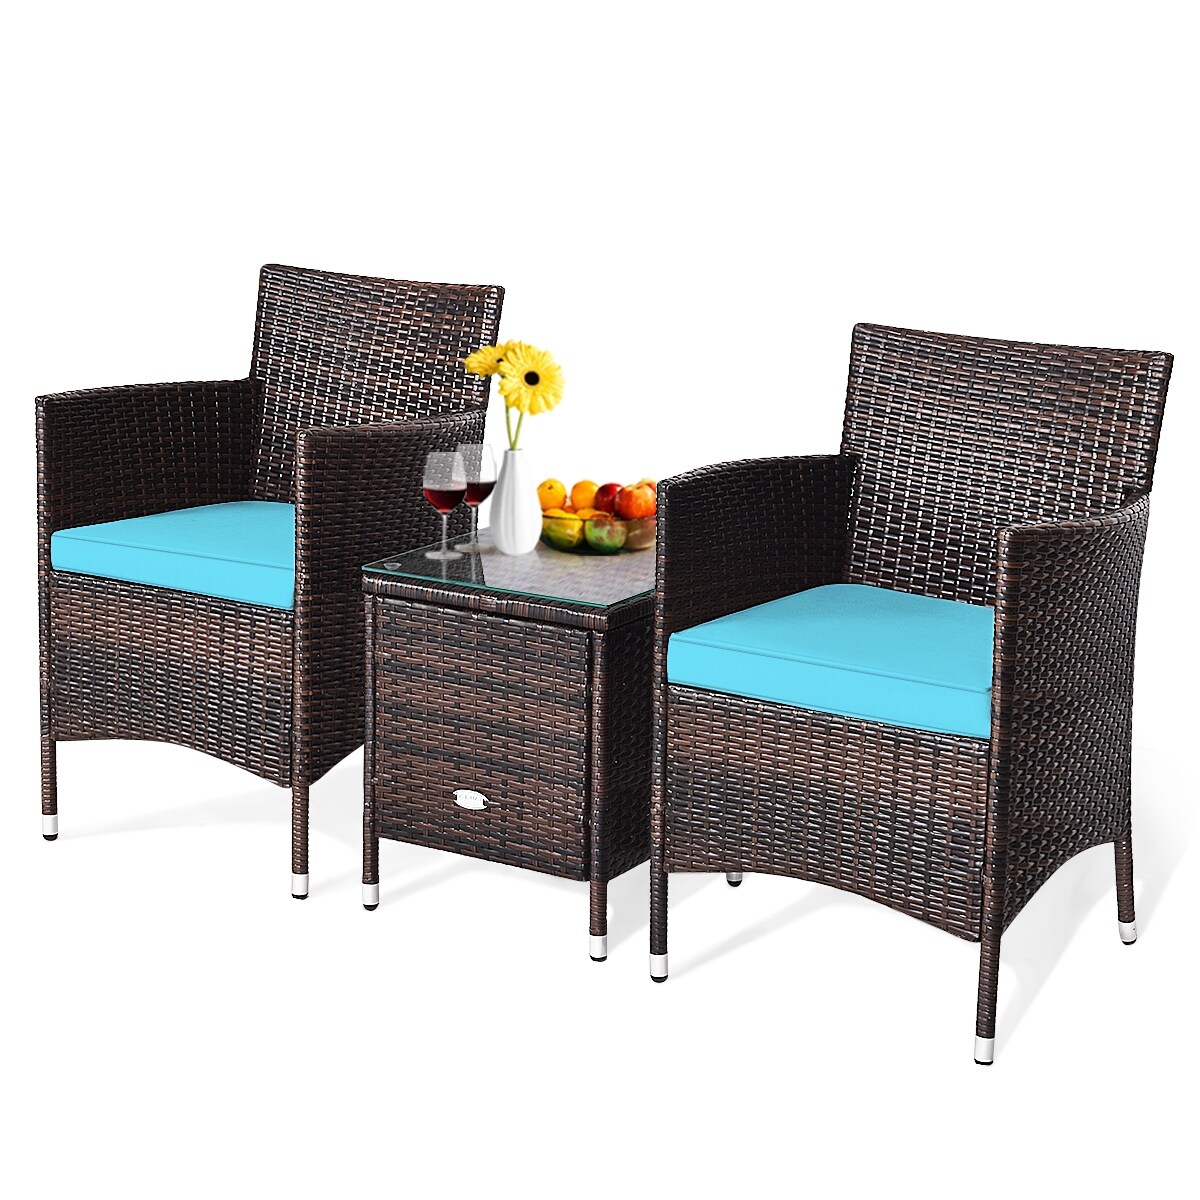 Costway Outdoor 3 PCS Rattan Wicker Furniture Sets Chairs Coffee Table - 3-Piece Sets